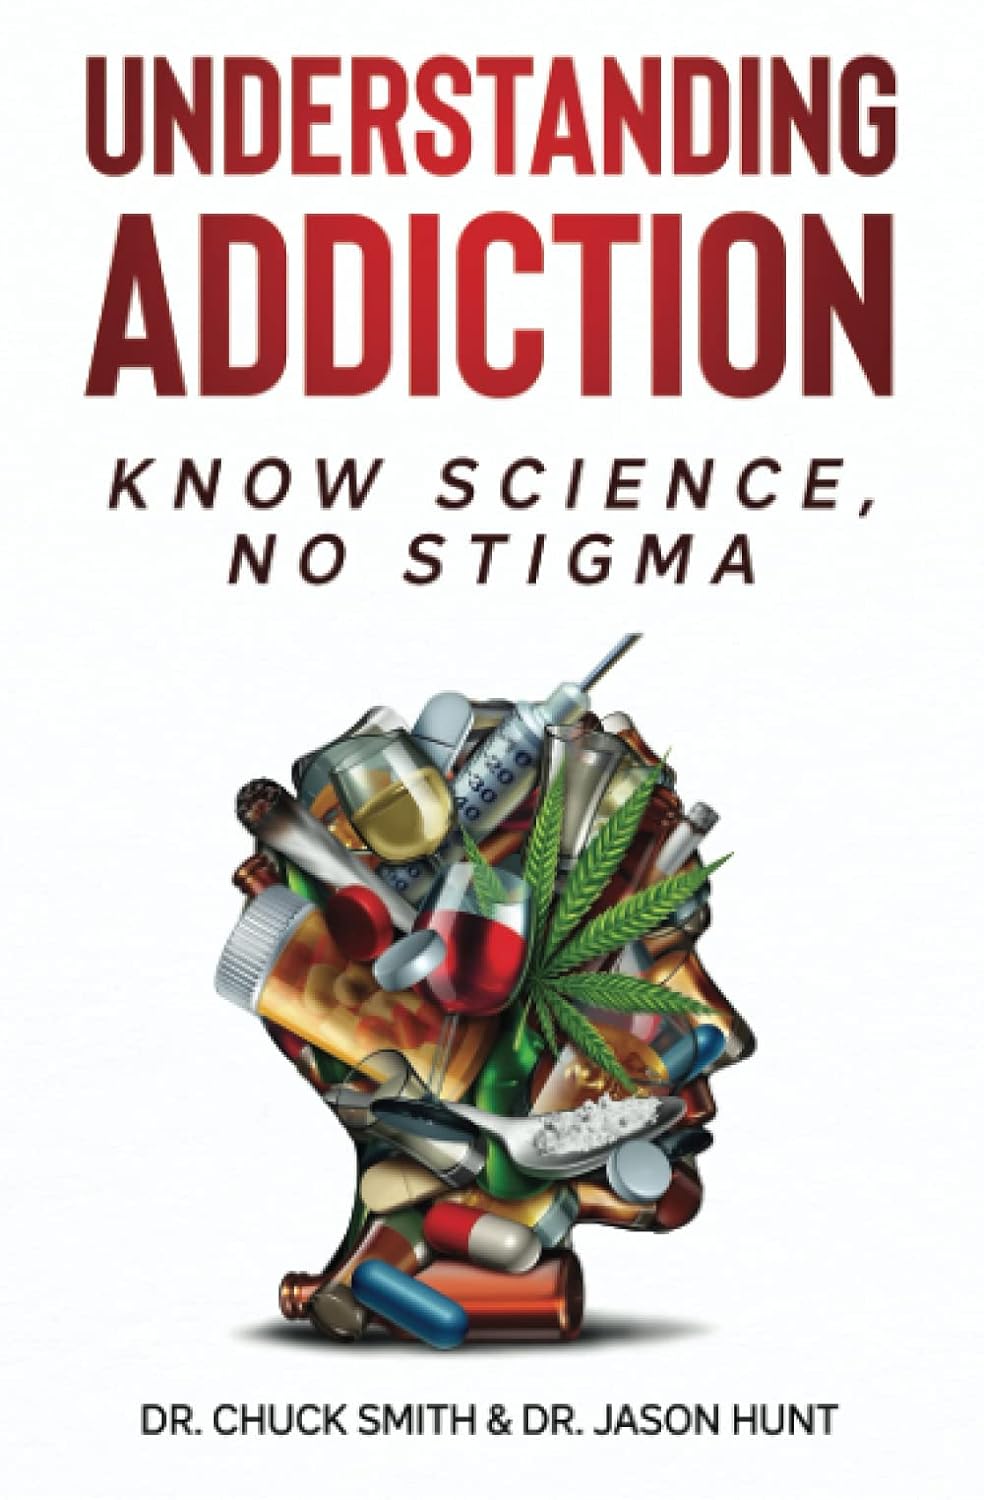 <p>Dr. Charles “Chuck” Smith is an addiction medicine physician at Florida’s Recovery First Treatment Center; Dr. Jason Hunt is a psychiatrist, addiction medicine specialist, and former professor at the University of Florida College of Medicine. In <a href="https://www.amazon.com/Understanding-Addiction-Know-Science-Stigma/dp/173723520X/?tag=skmsn-20"><em>Understanding Addiction</em></a>, both physicians clearly and concisely unpack the science behind substance use disorders. The book isn’t exclusively about drinking, but it’s an informative, digestible read for anyone who wants a stigma-free overview of why substances like alcohol are so addictive.</p> <a href="https://www.amazon.com/dp/173723520X?tag=skmsn-20&linkCode=ogi&th=1&psc=1&language=en_US&asc_source=web&asc_campaign=web&asc_refurl=https%3A%2F%2Fwww.sheknows.com%2F%3Fpost_type%3Dpmc-gallery%26p%3D2892532" rel="nofollow">Buy: 'Understanding Addiction' $14.98</a>